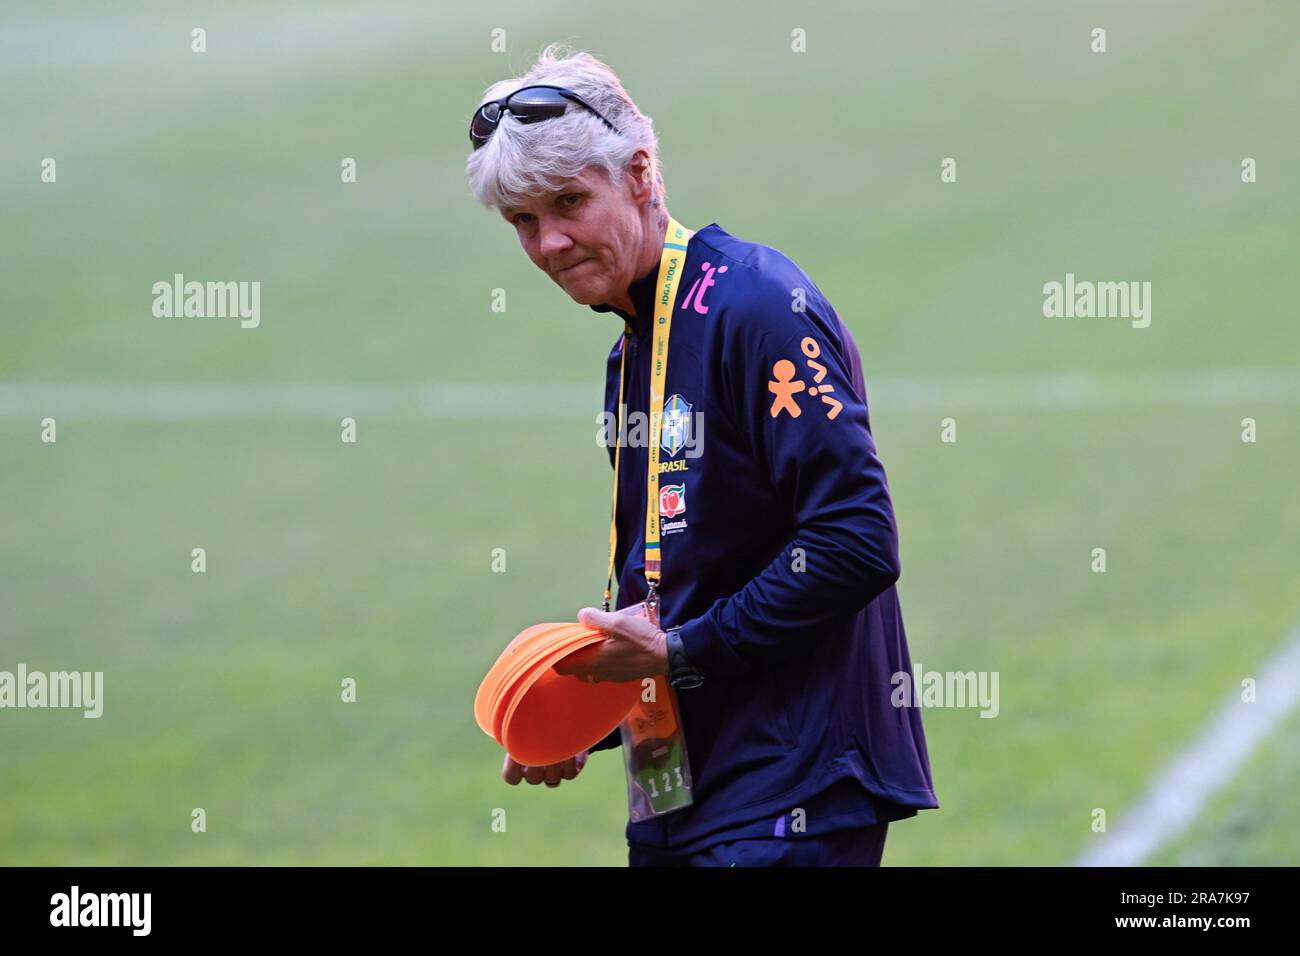 DF - BRASILIA - 01/07/2023 - BRASILIA, LULA PARTICIPATES IN TRAINING OF THE WOMEN'S SOCCER TEAM - Coach Pia Sundhage walks on the field before the start of a training session for the women's national soccer team, at the Mane Garrincha stadium, in Brasilia, Brazil, Saturday, July 1, 2023. The Brazil women's national football team is scheduled to play a friendly against Chile on Sunday, ahead of their trip to the FIFA Women's World Cup. Photo: Mateus Bonomi/AGIF/Sipa USA Stock Photo